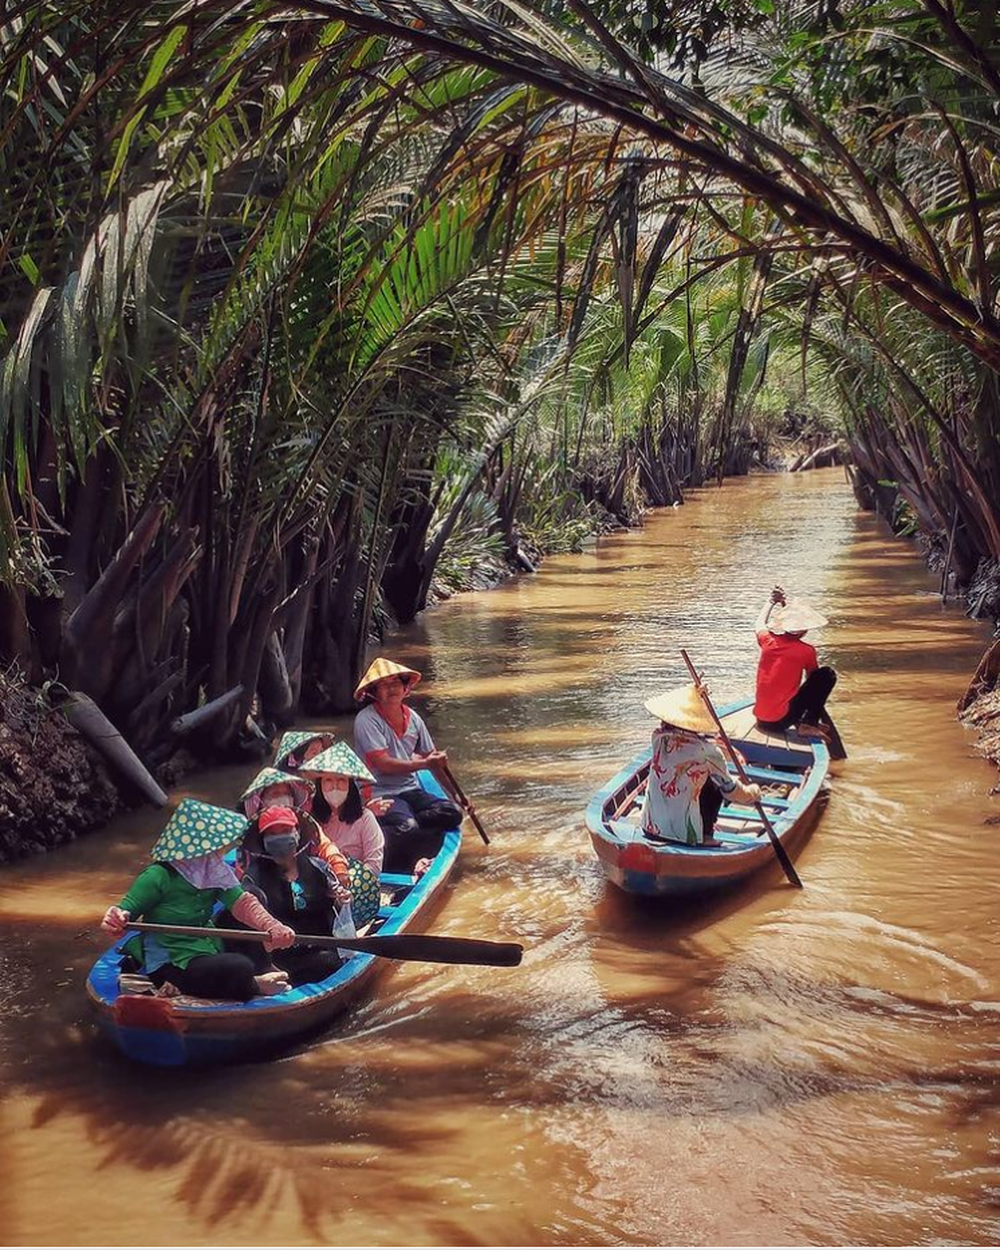 Canadian magazine suggests unique experiences in the Mekong Delta: Food for the brave - Photo 3.